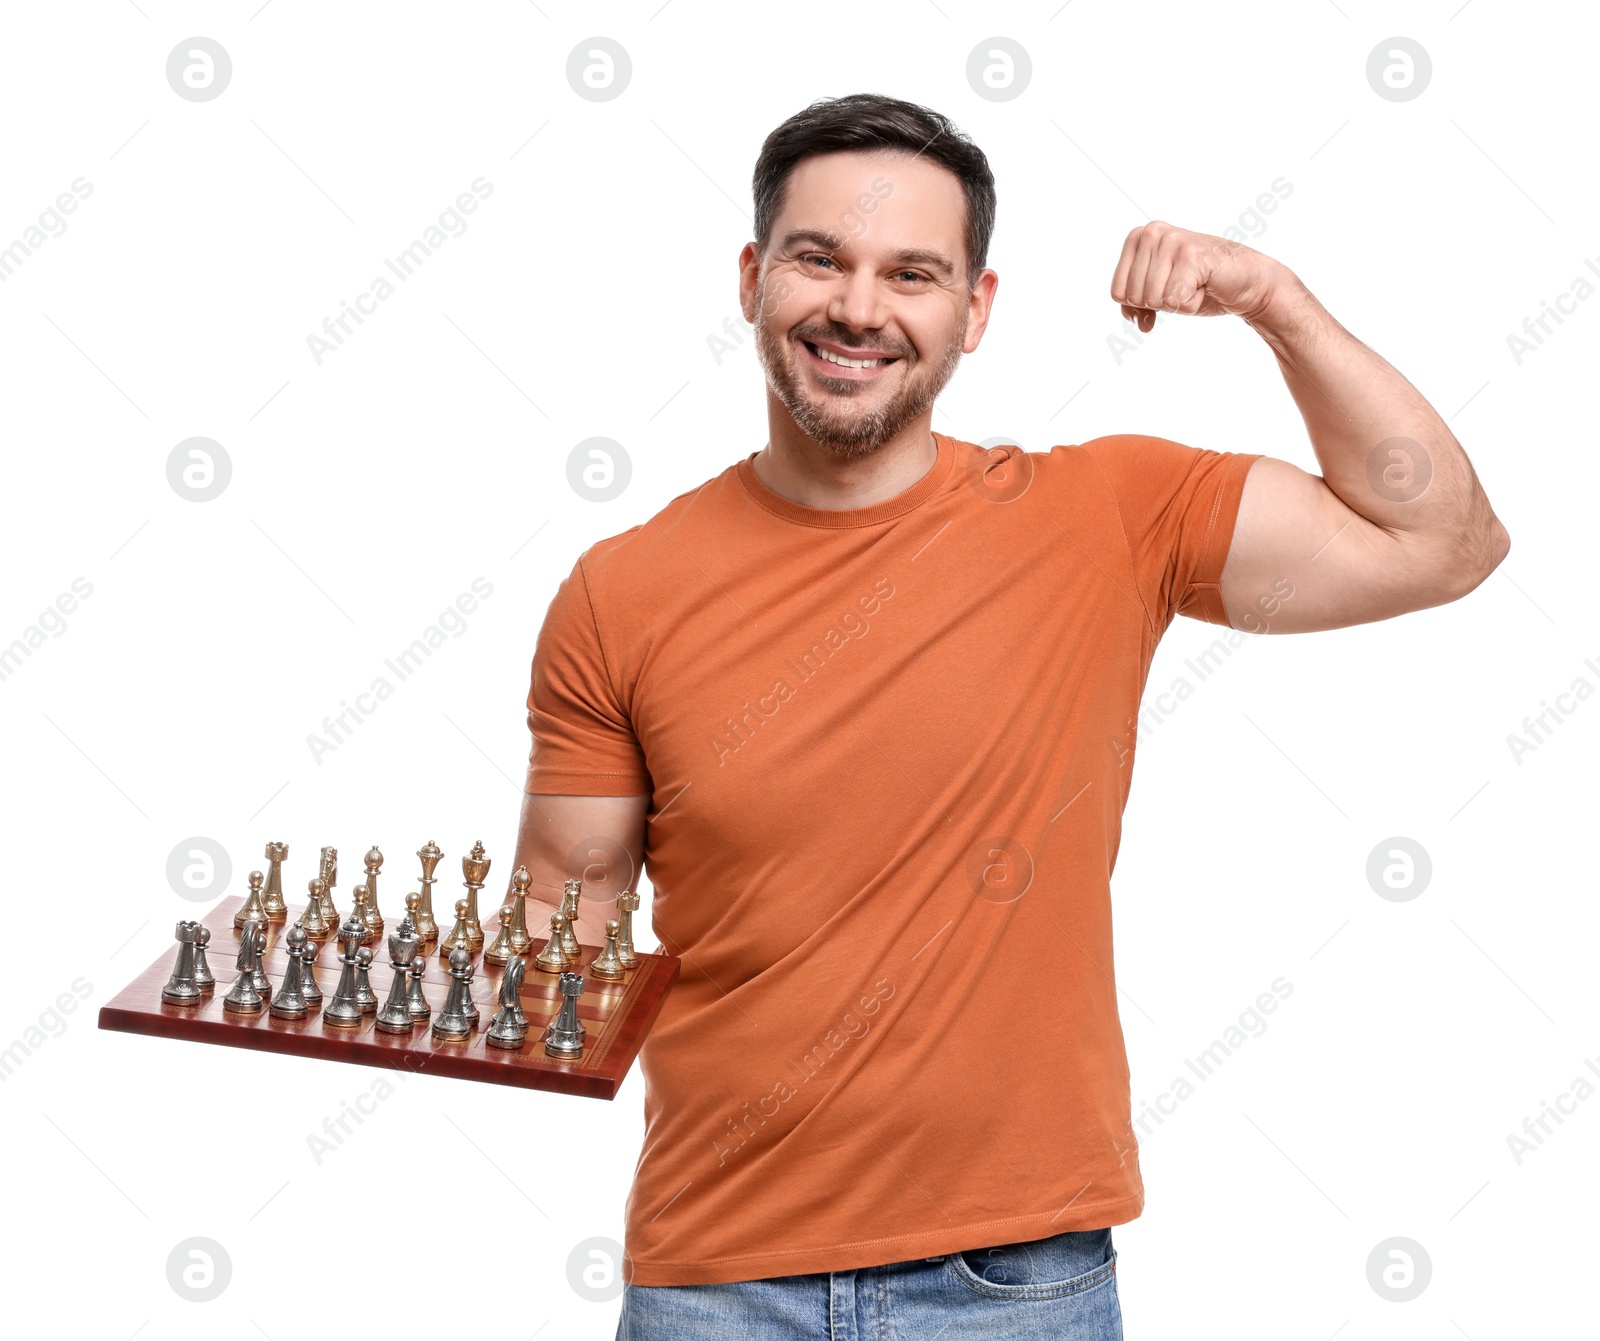 Photo of Smiling man holding chessboard with game pieces and showing bicep on white background